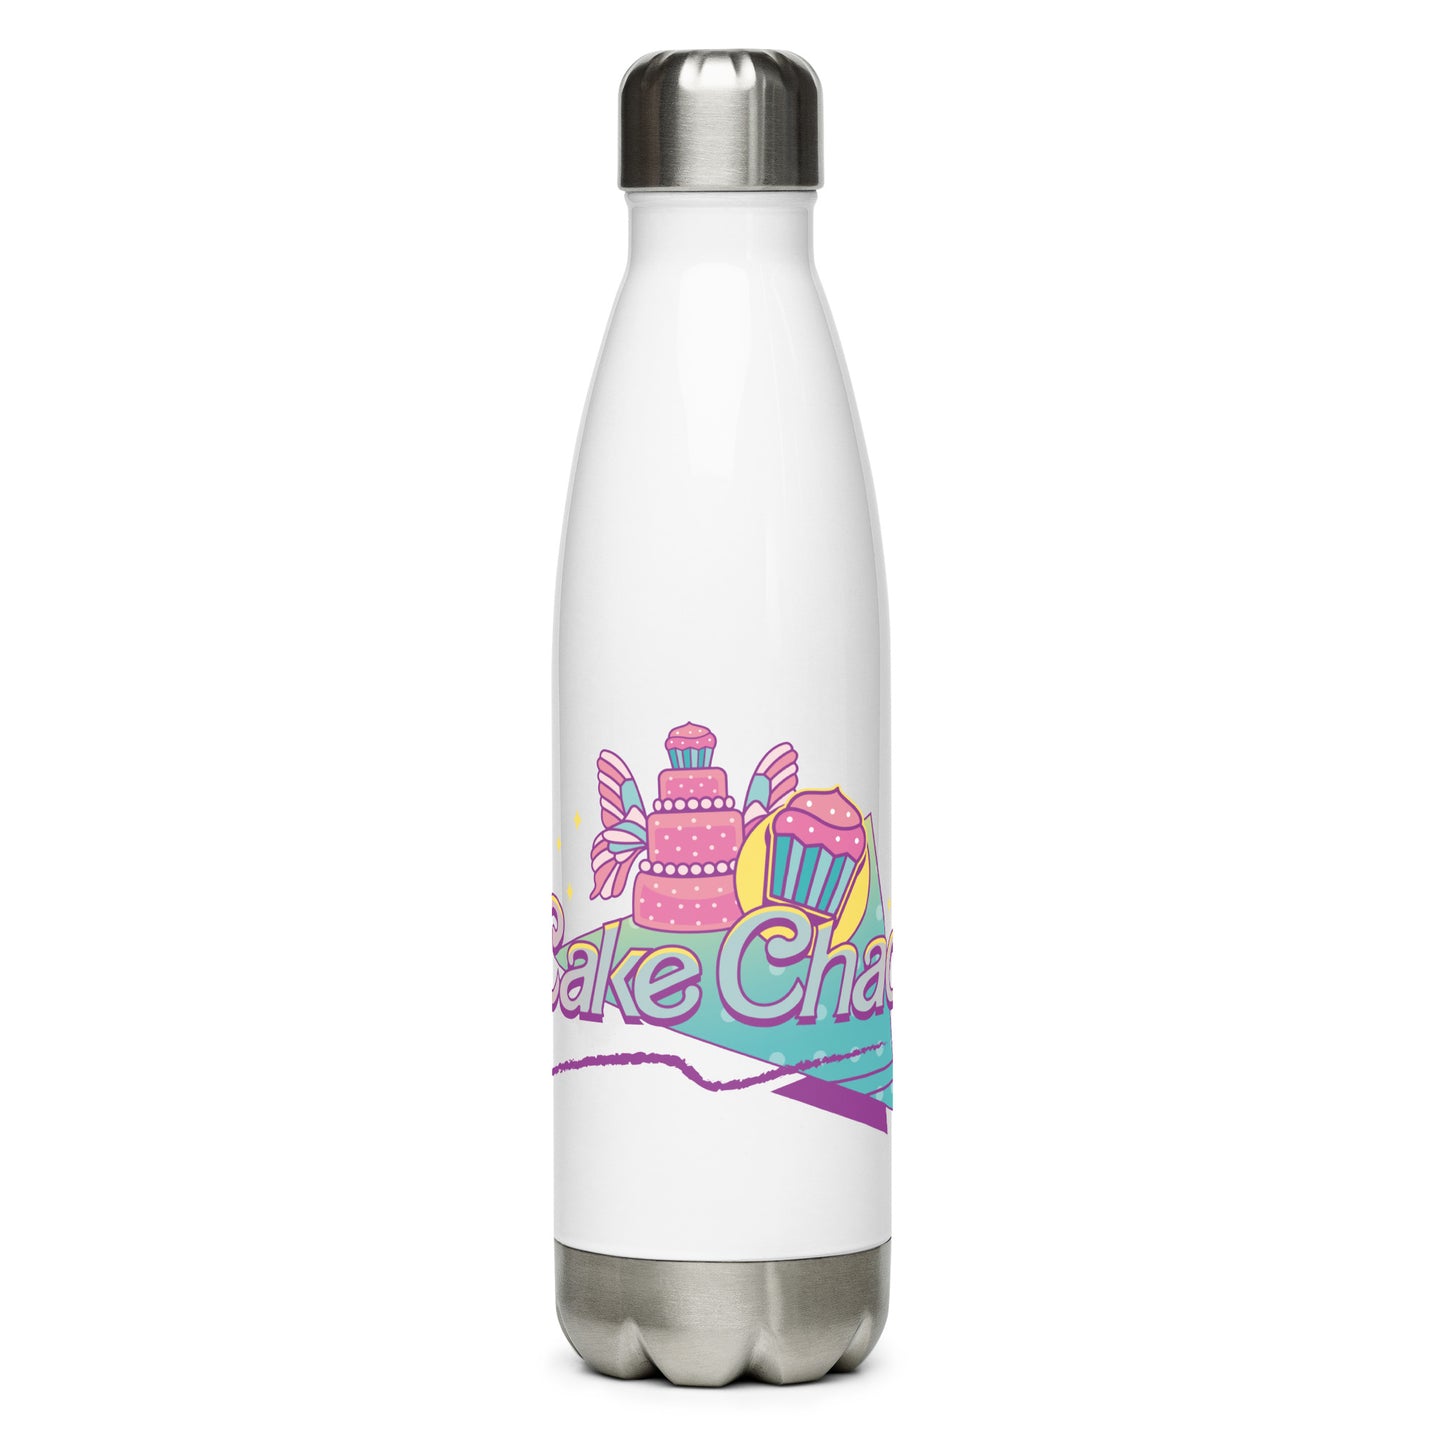 Cake Chad - Water Bottle